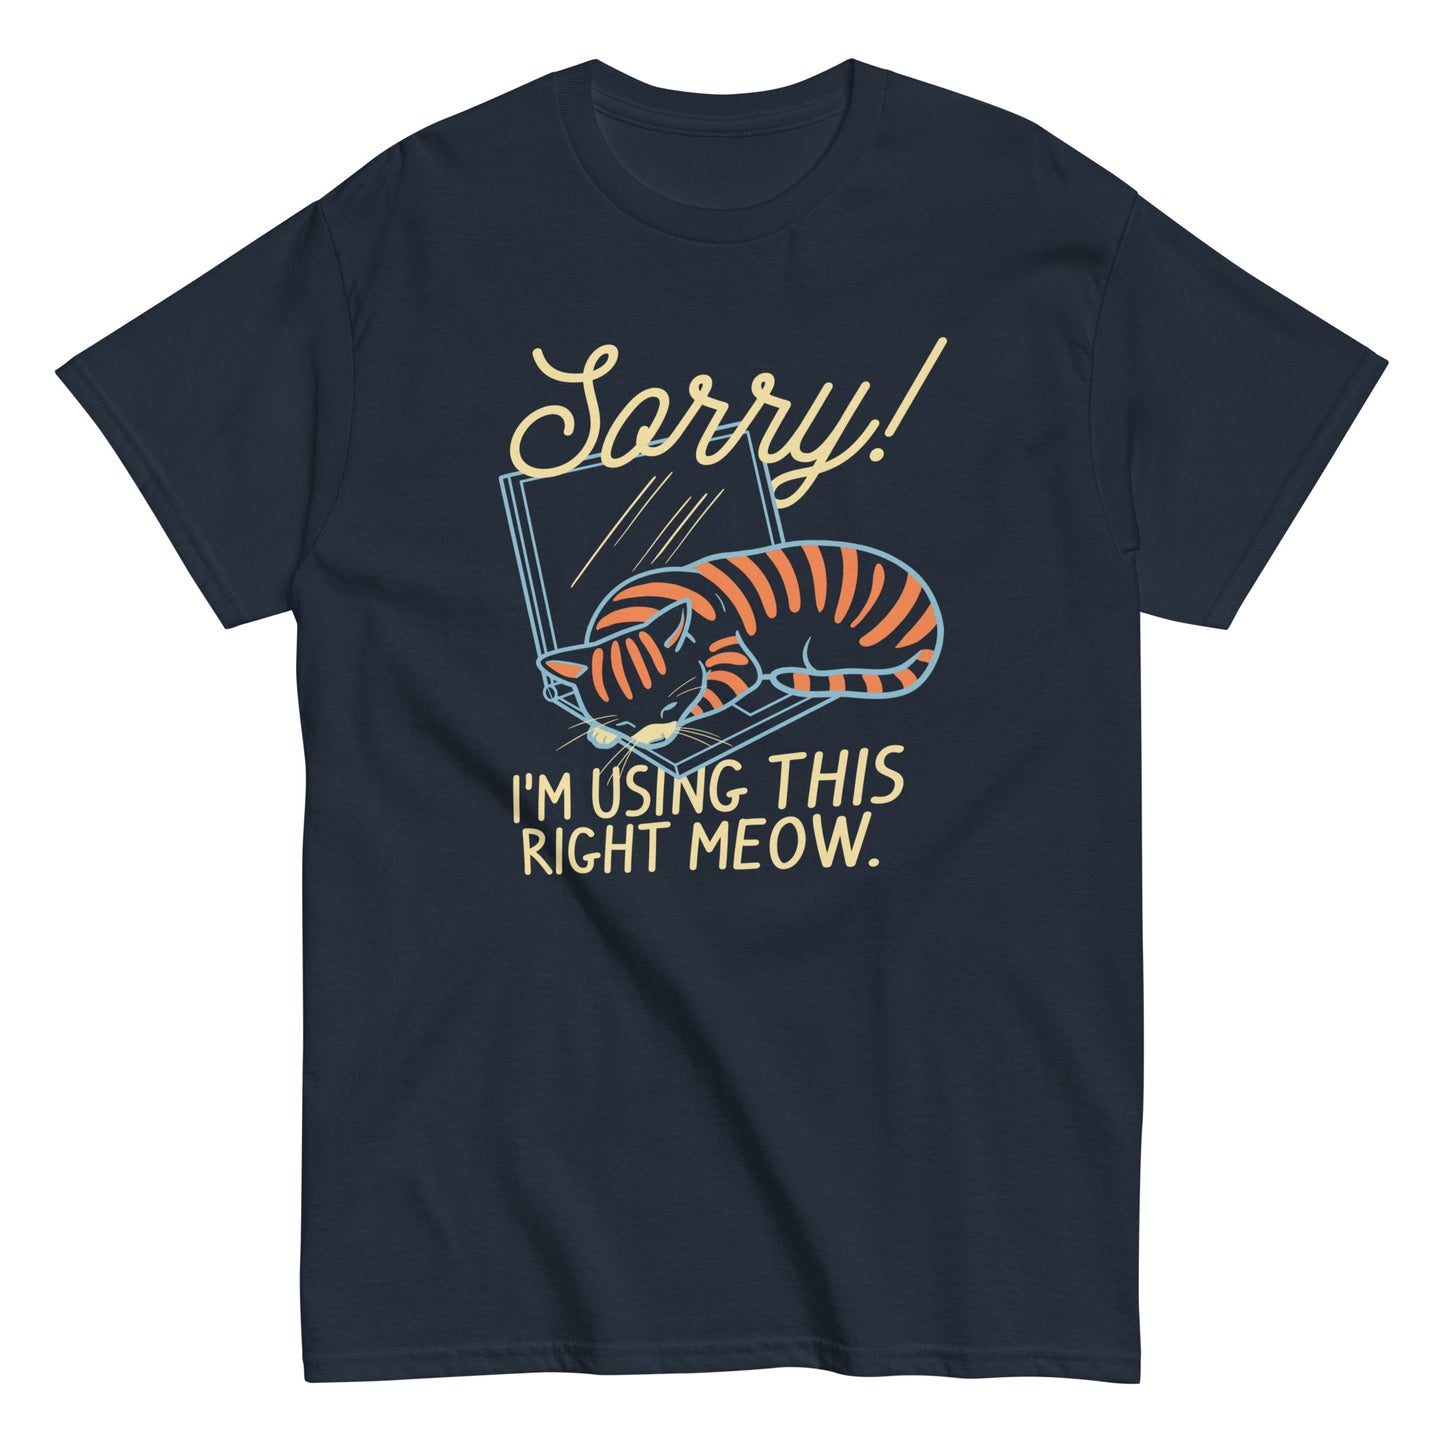 Sorry! I'm Using This Right Meow Men's Classic Tee